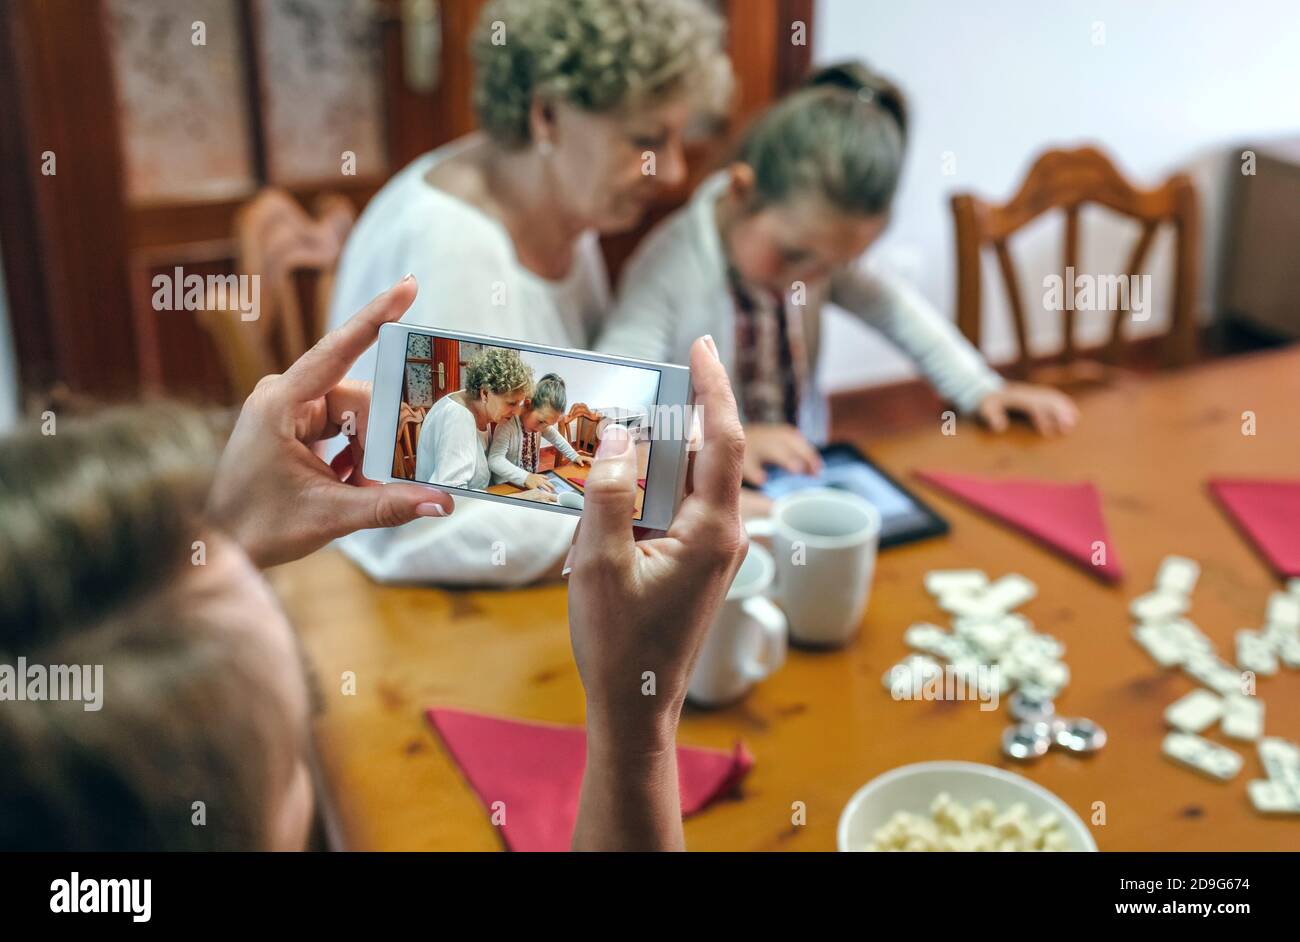 Grandmother and granddaughter play a game on the tablet Stock Photo